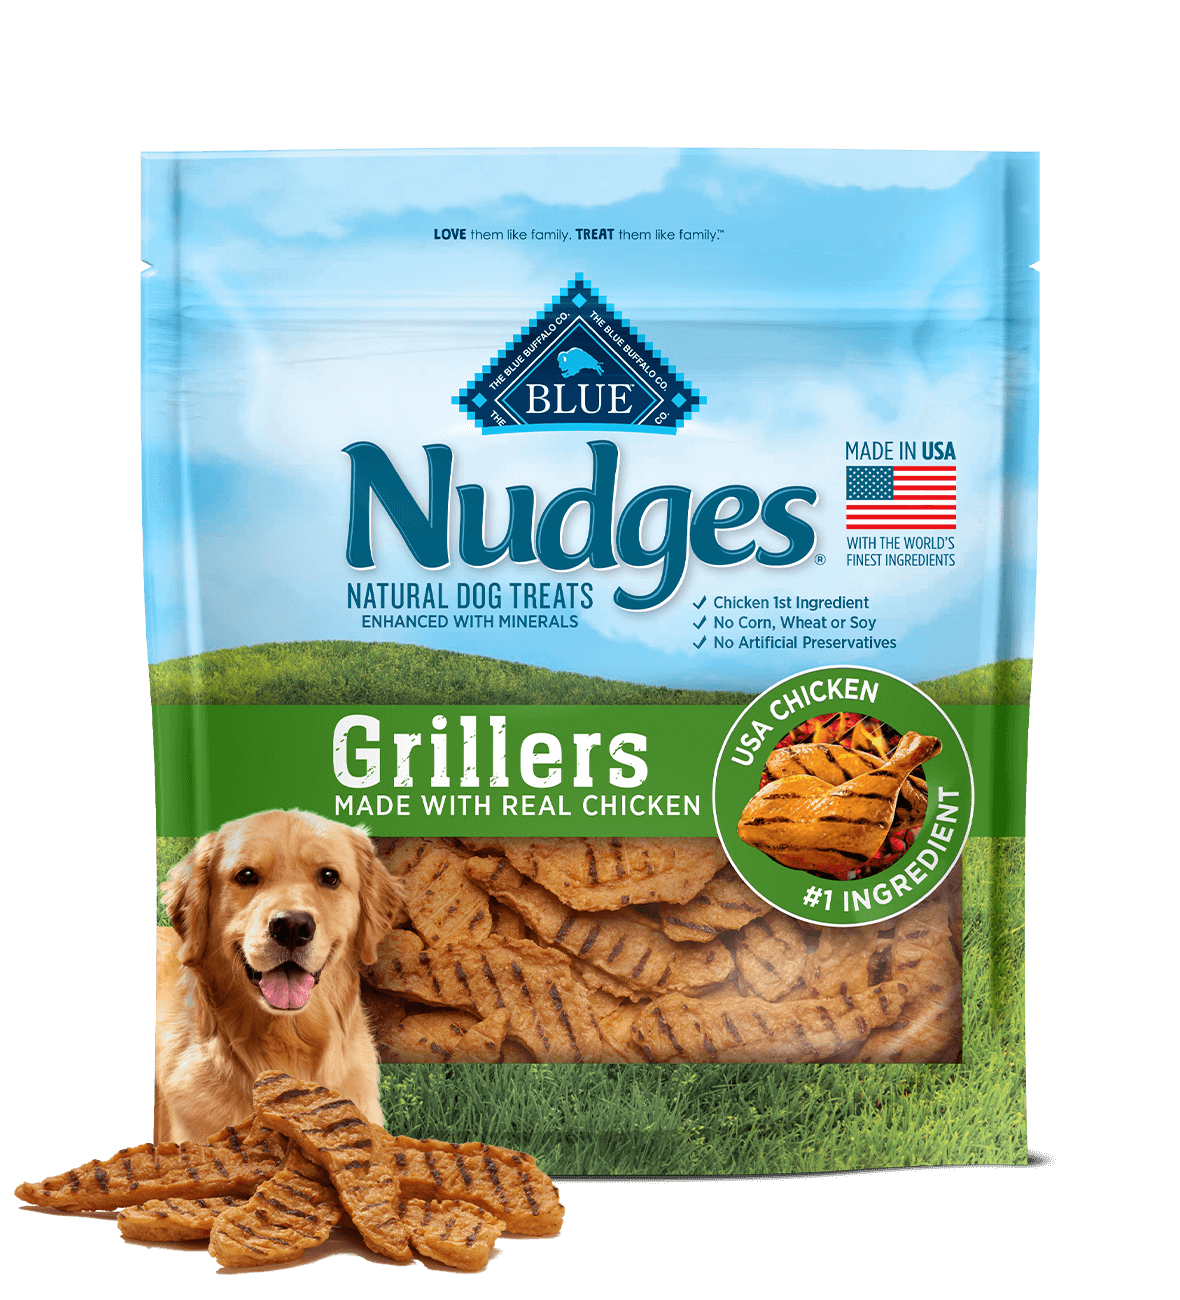 blue nudges ® deliciously charred real chicken grillers dog treats